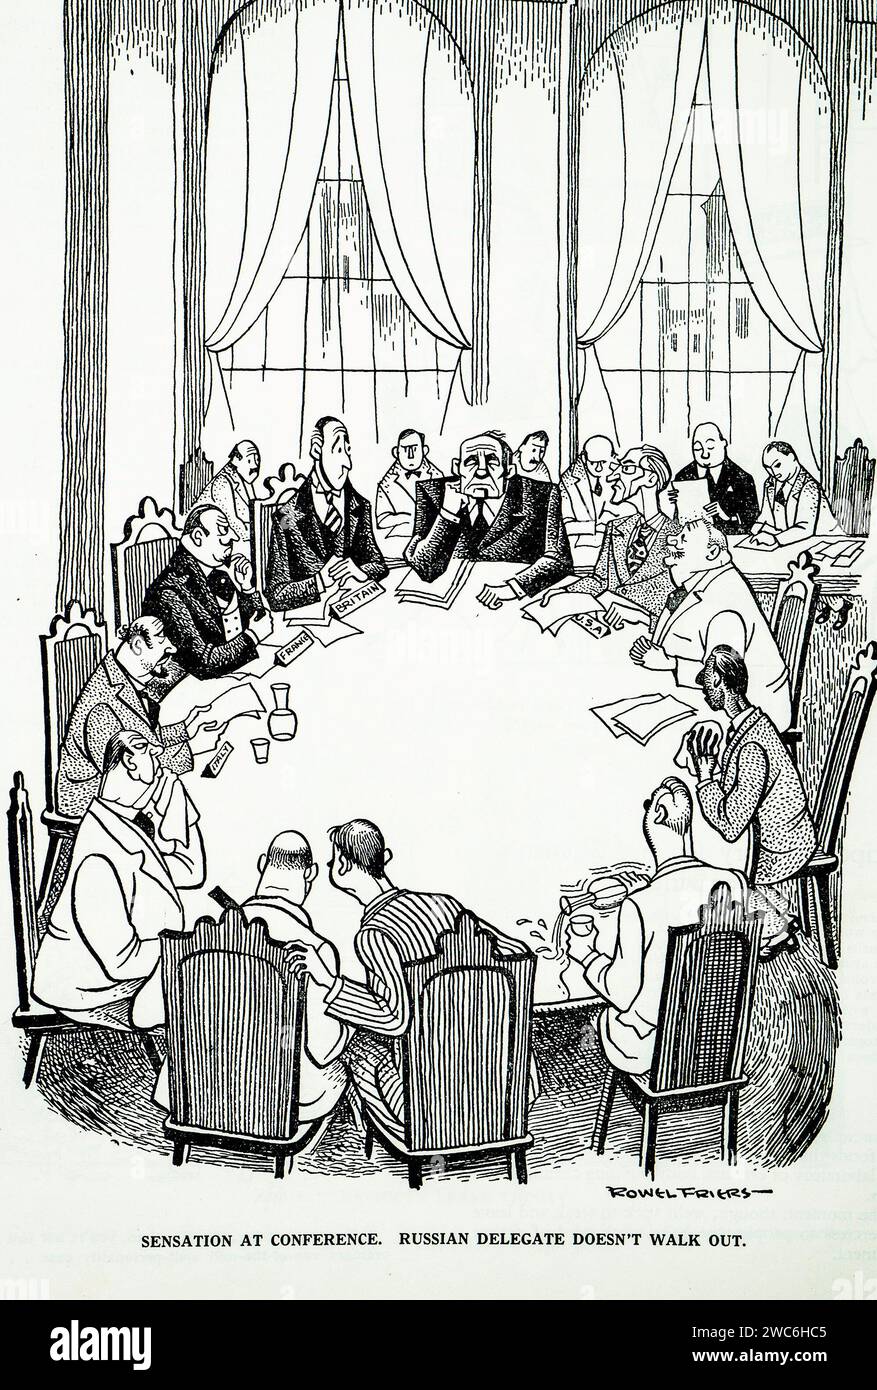 This Dublin Opinion Magazine vintage cartoon  captures a satirical moment where a conference of international delegates is taking place, and the caption humorously notes the Russian delegates presence. Stock Photo